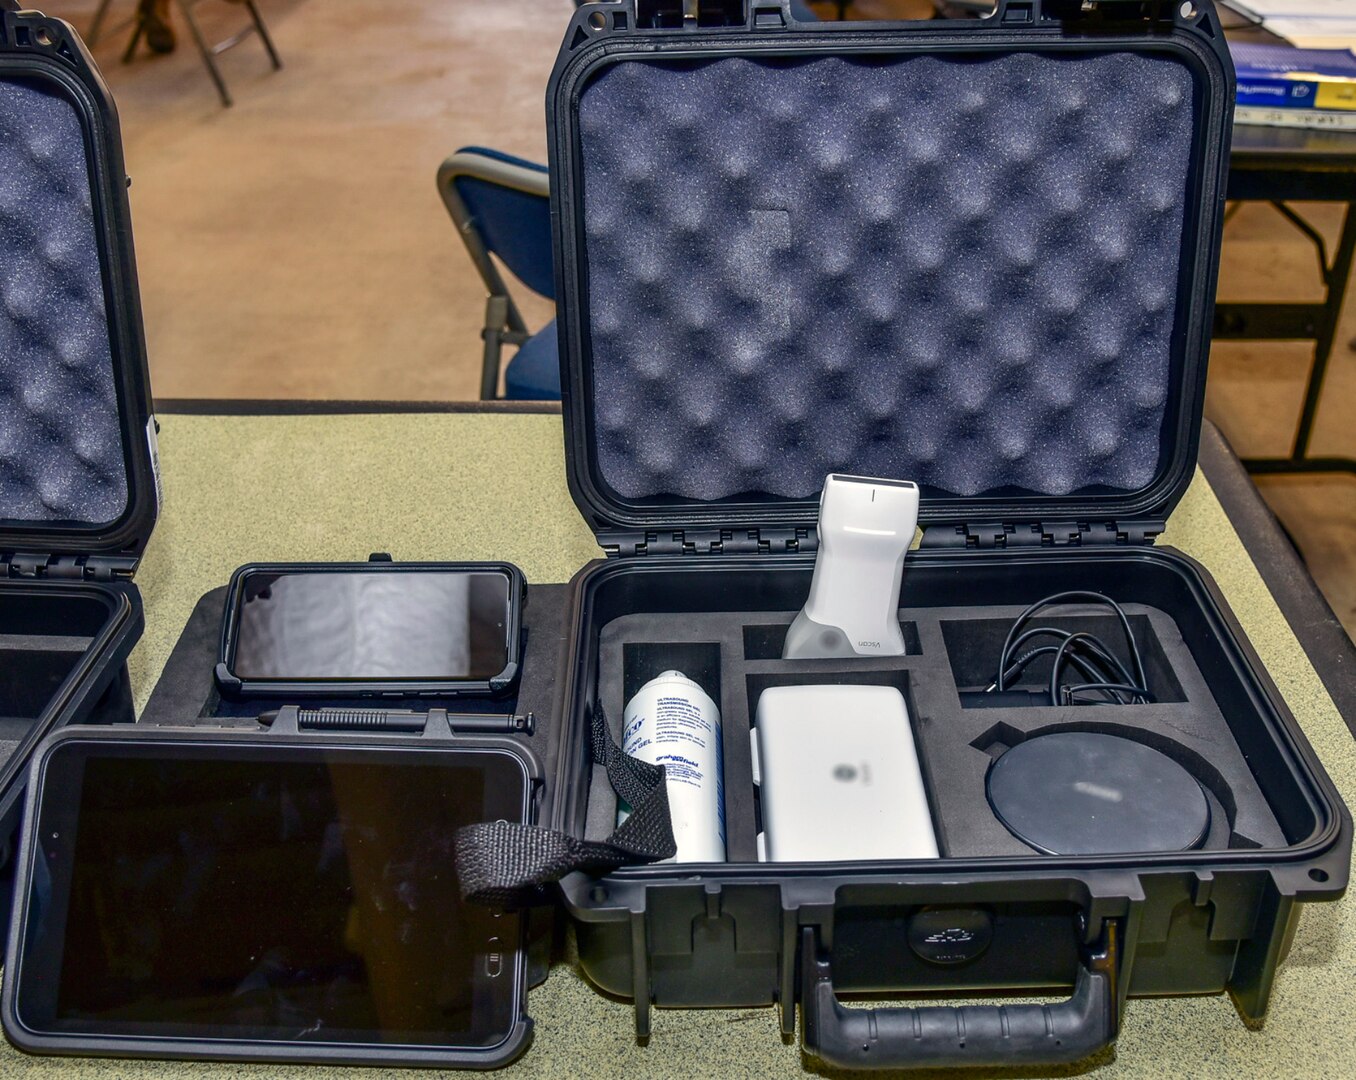 A close-up view of one of the Ultrasound Field Portable kits.